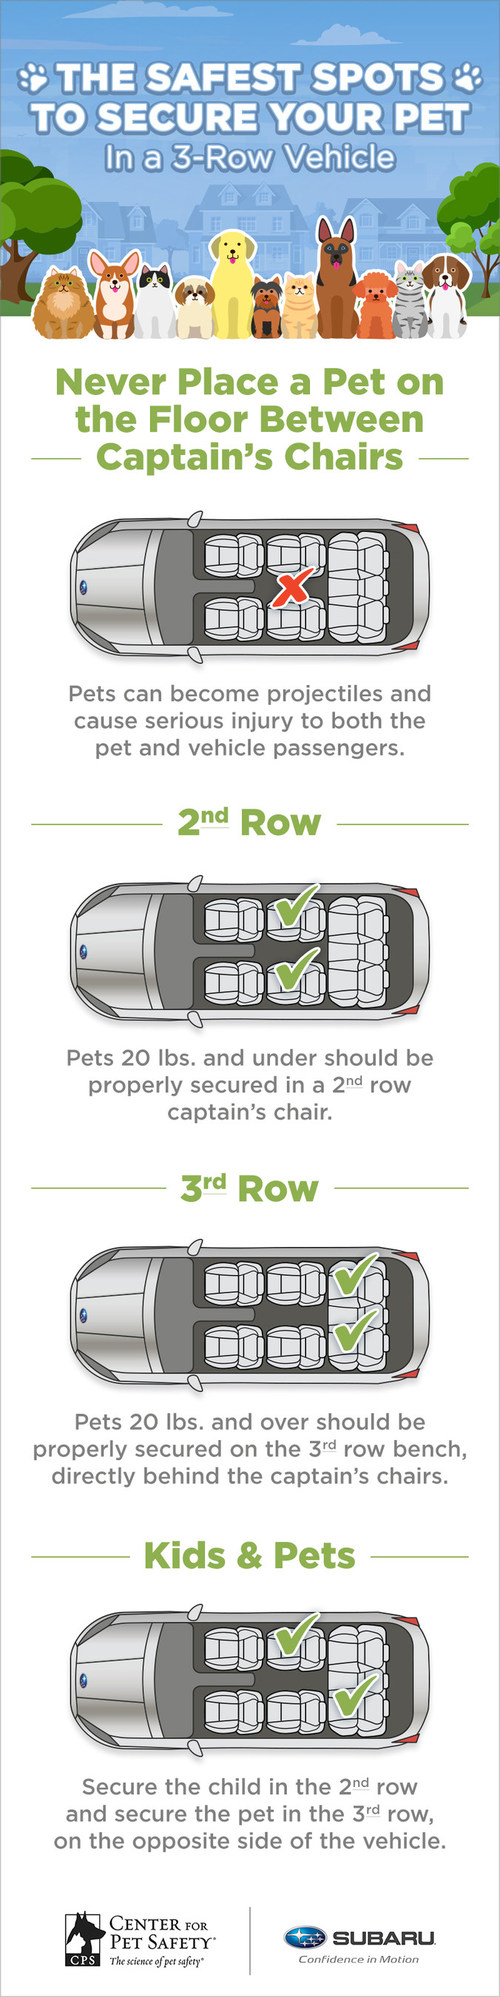 Subaru of America, Inc. and Center for Pet Safety Unveil the Safest and Most Dangerous Spots for Pets in an SUV